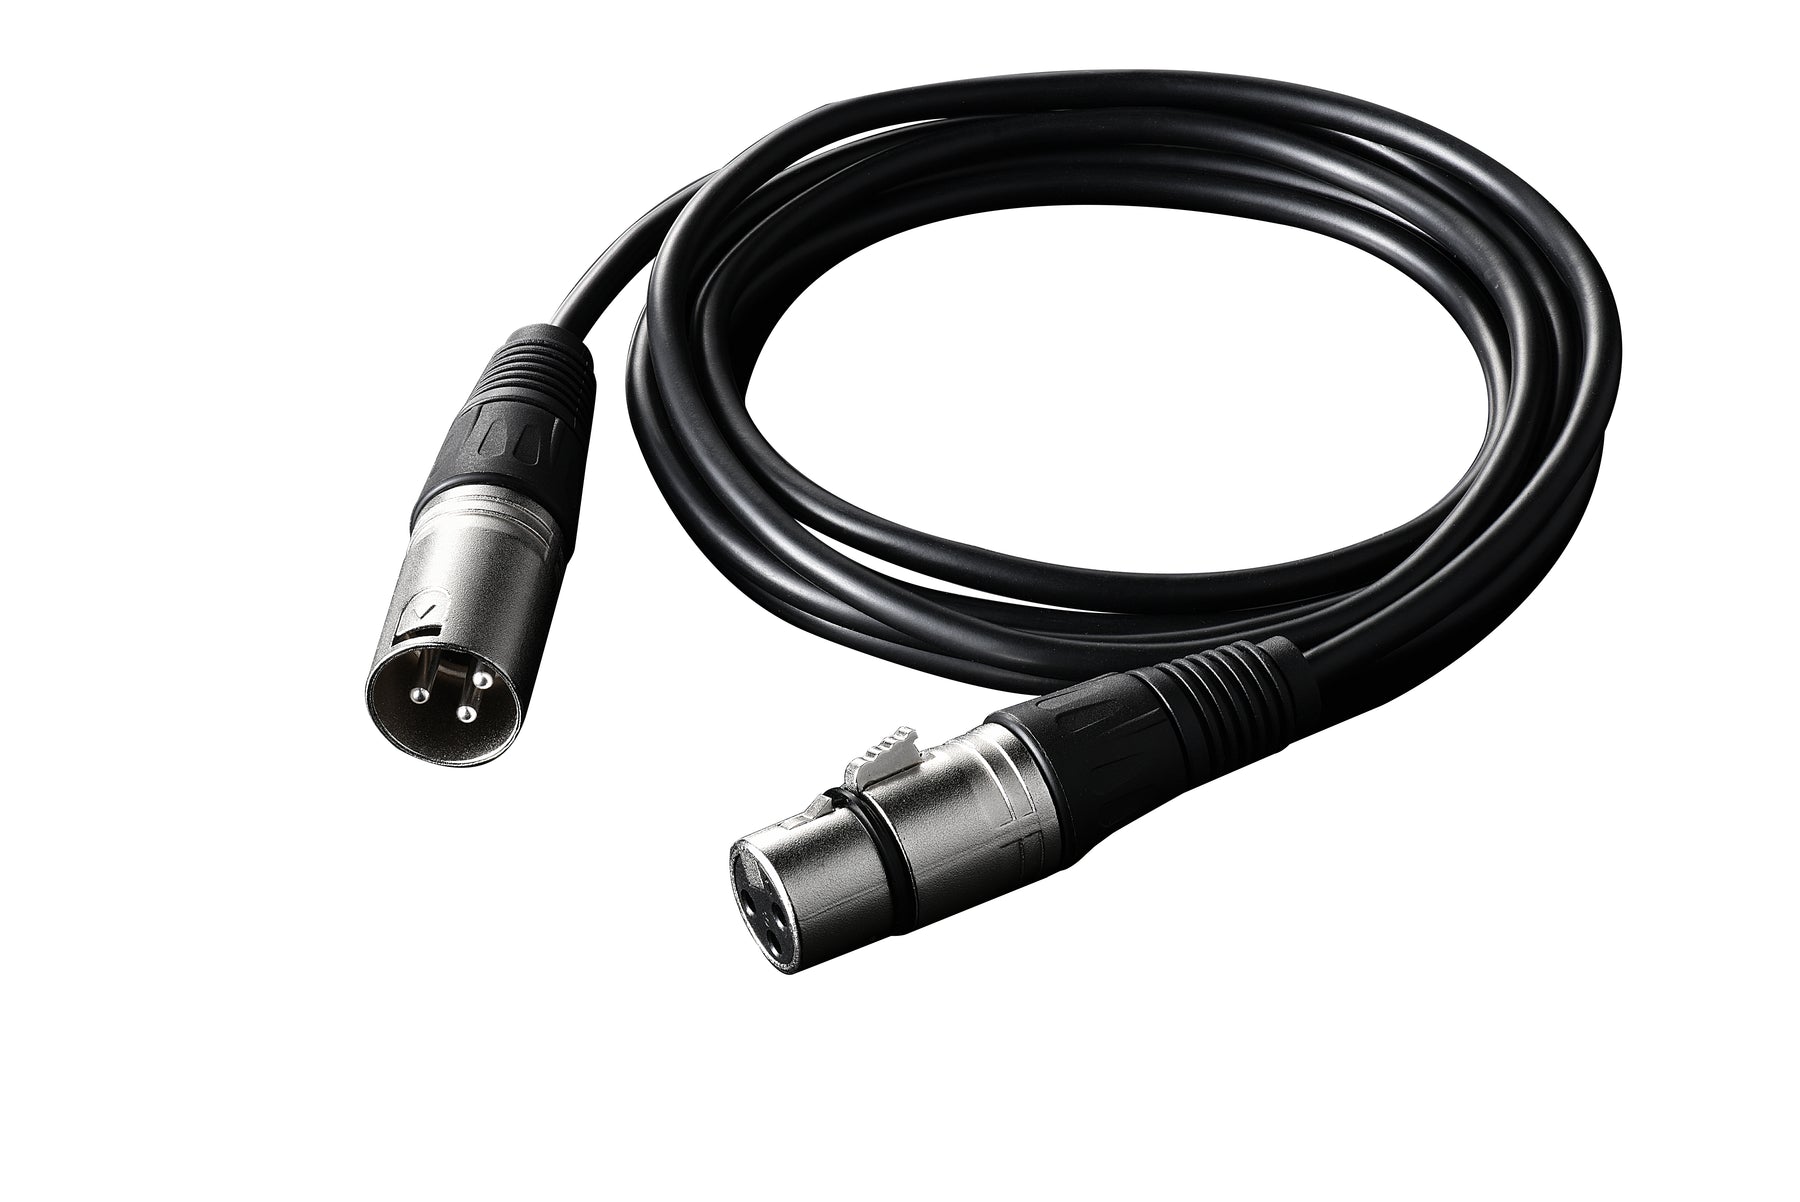 IBRA XLR Mic Cable Premium Quality Pro Microphone Lead | Balanced Male XLR to Female XLR | 5 Metre | Clearer Sound for PA Systems, Studio Recording, Mixers, Amplification & Speakers - BLACK